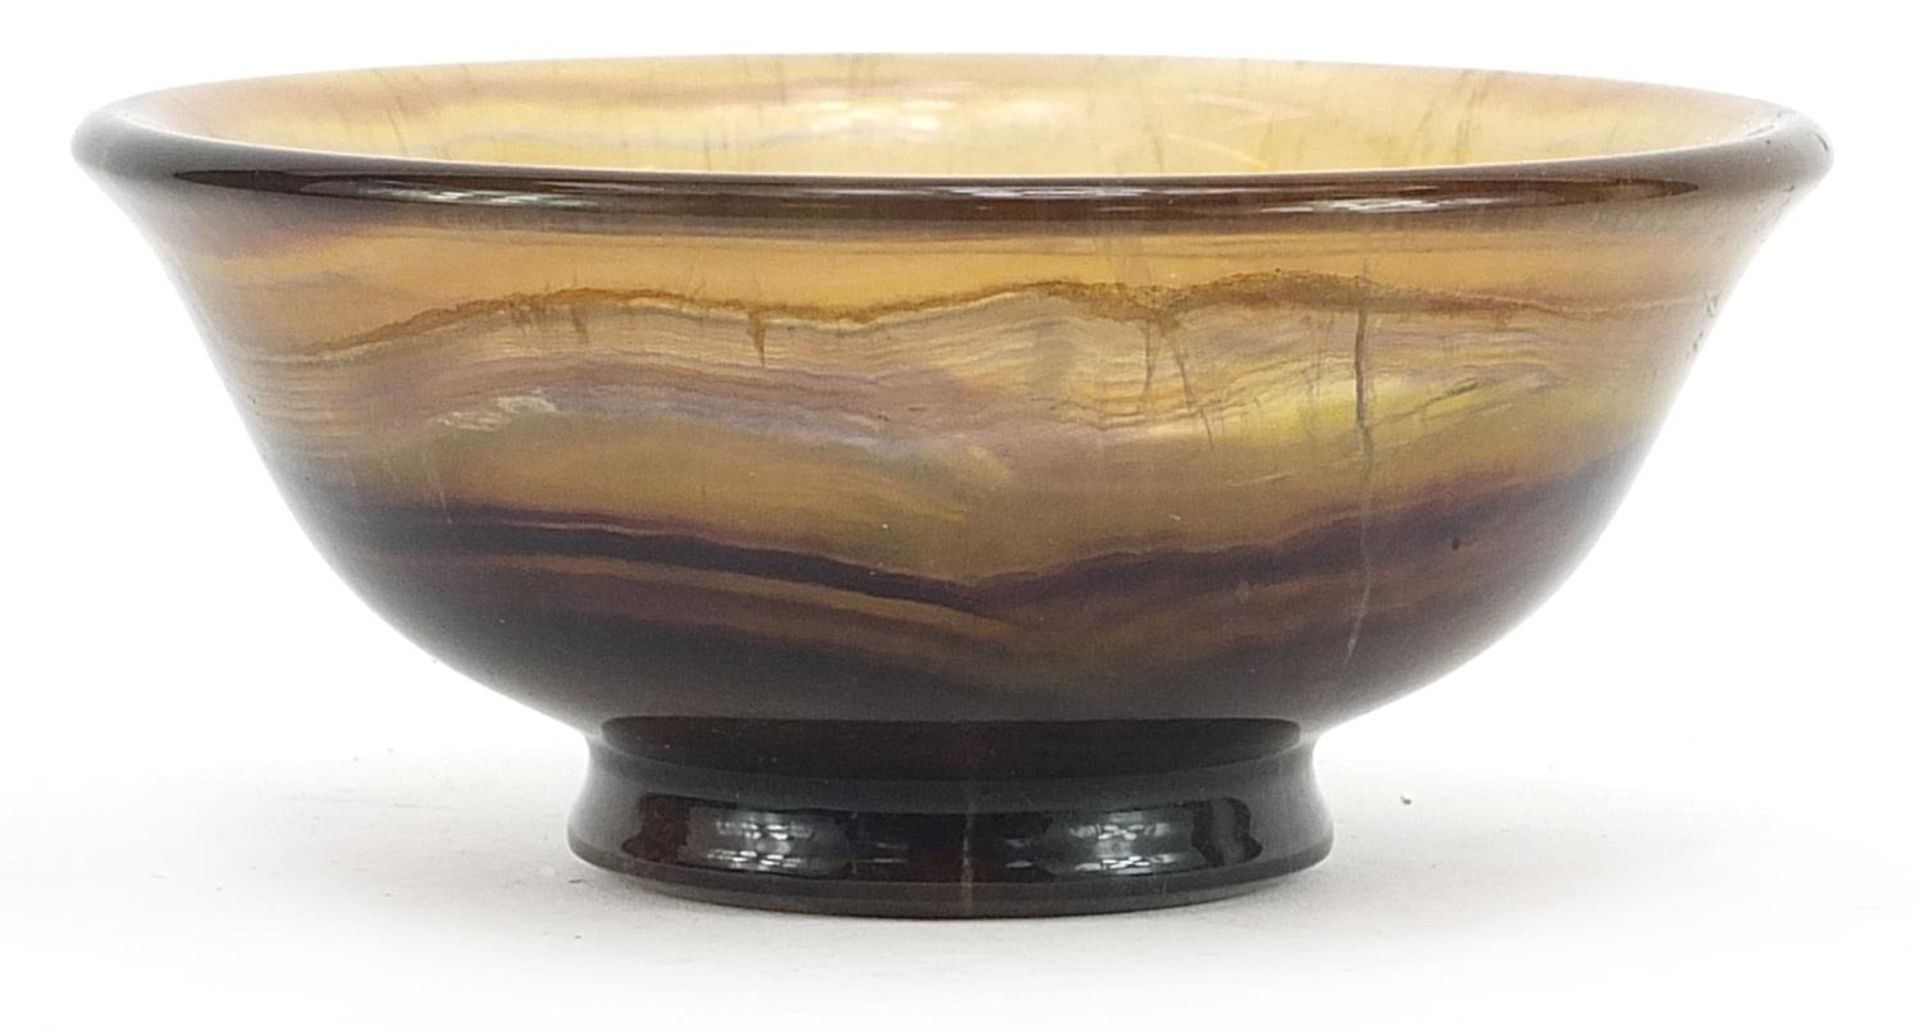 Polished flourite footed bowl, 14.5cm in diameter